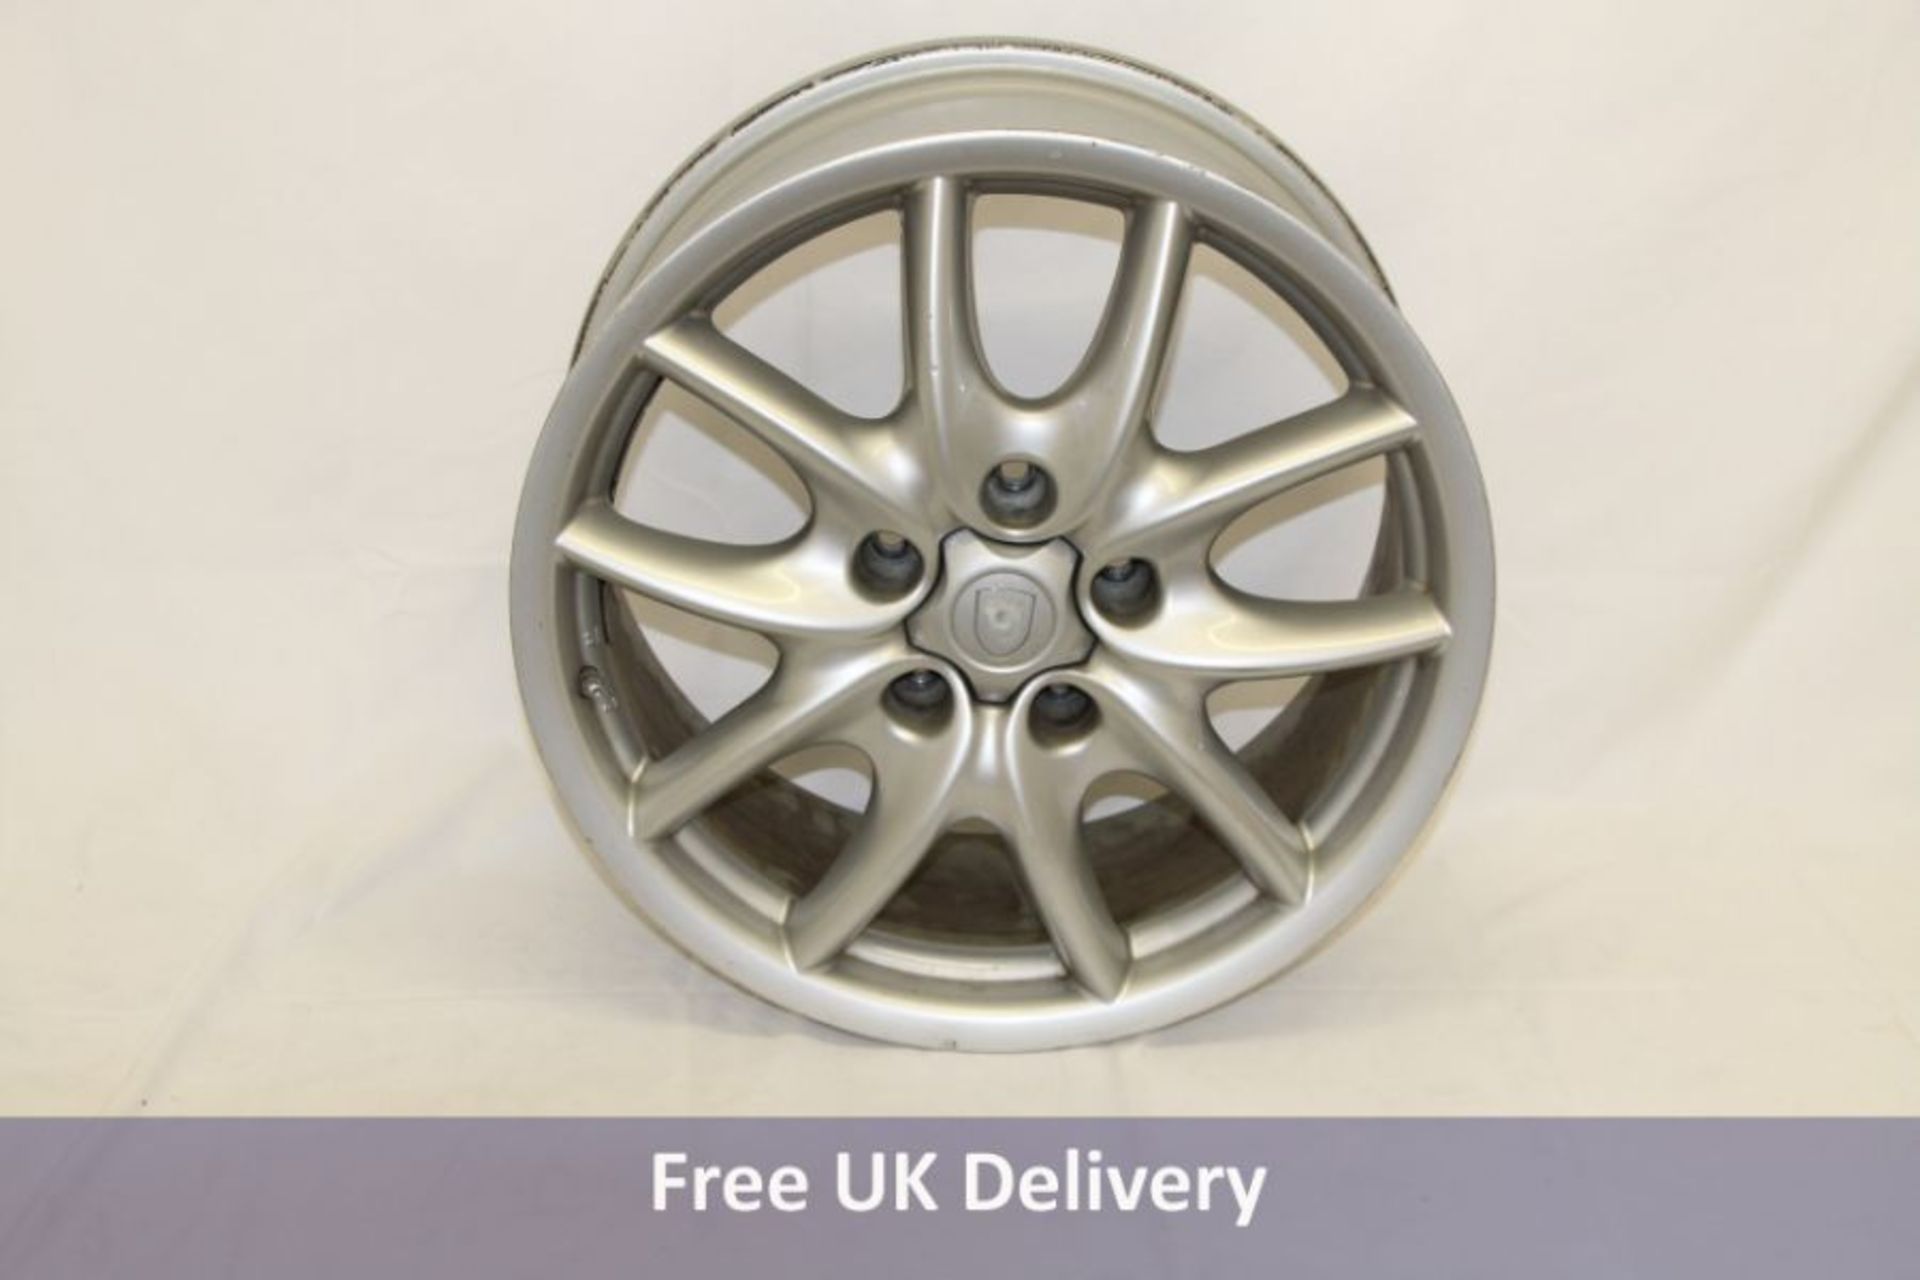 Genuine Porsche Cayenne 958 5 Twin Spoke 18″ Inch Alloy Wheel with Silver Finish 7P5.601.25.AB. Used